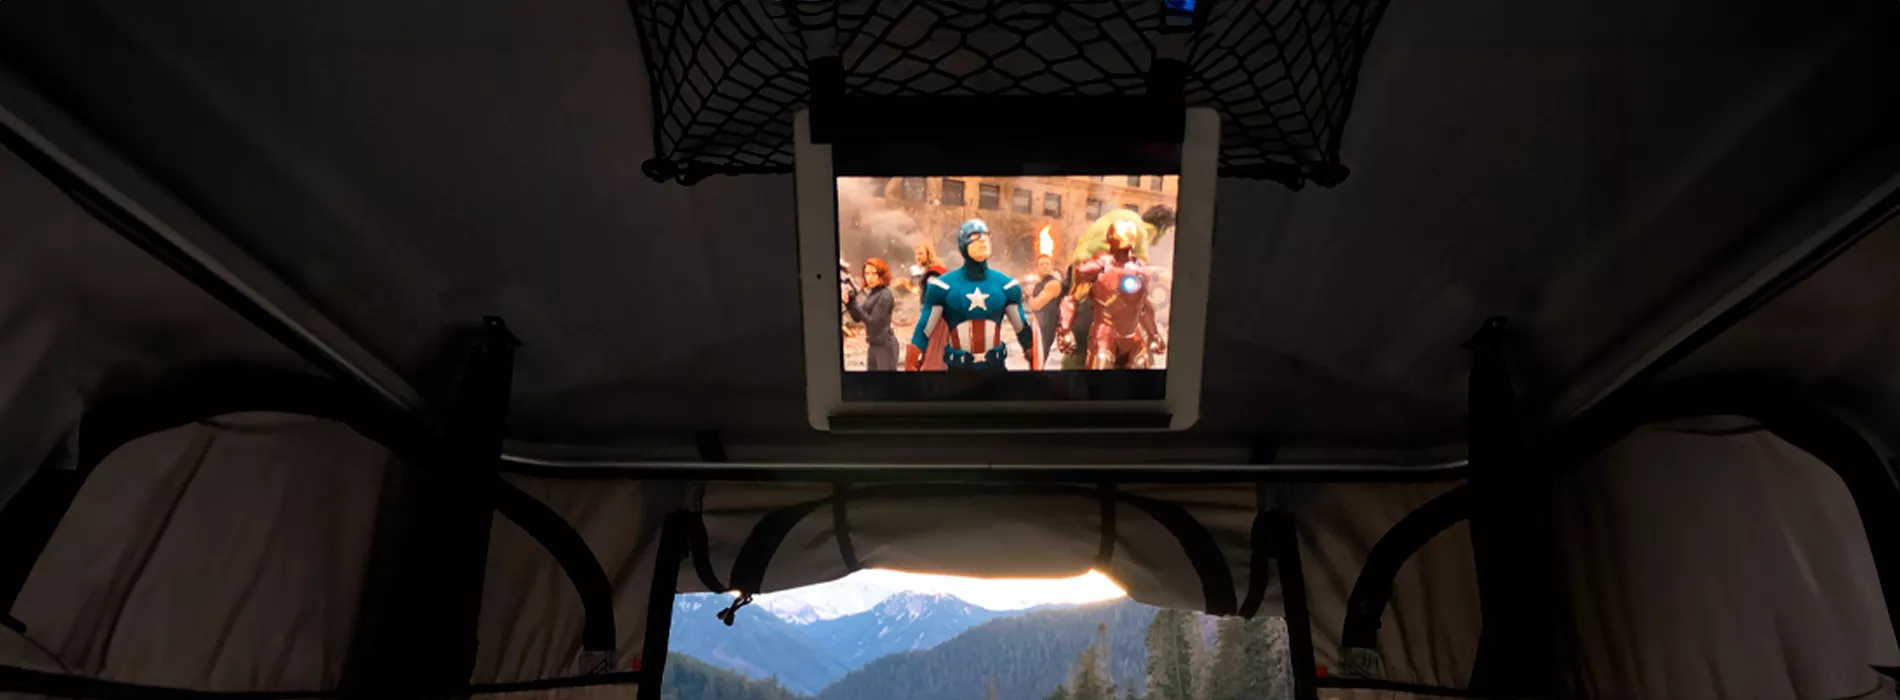 View inside a Rooftop Tent with Tablet Support